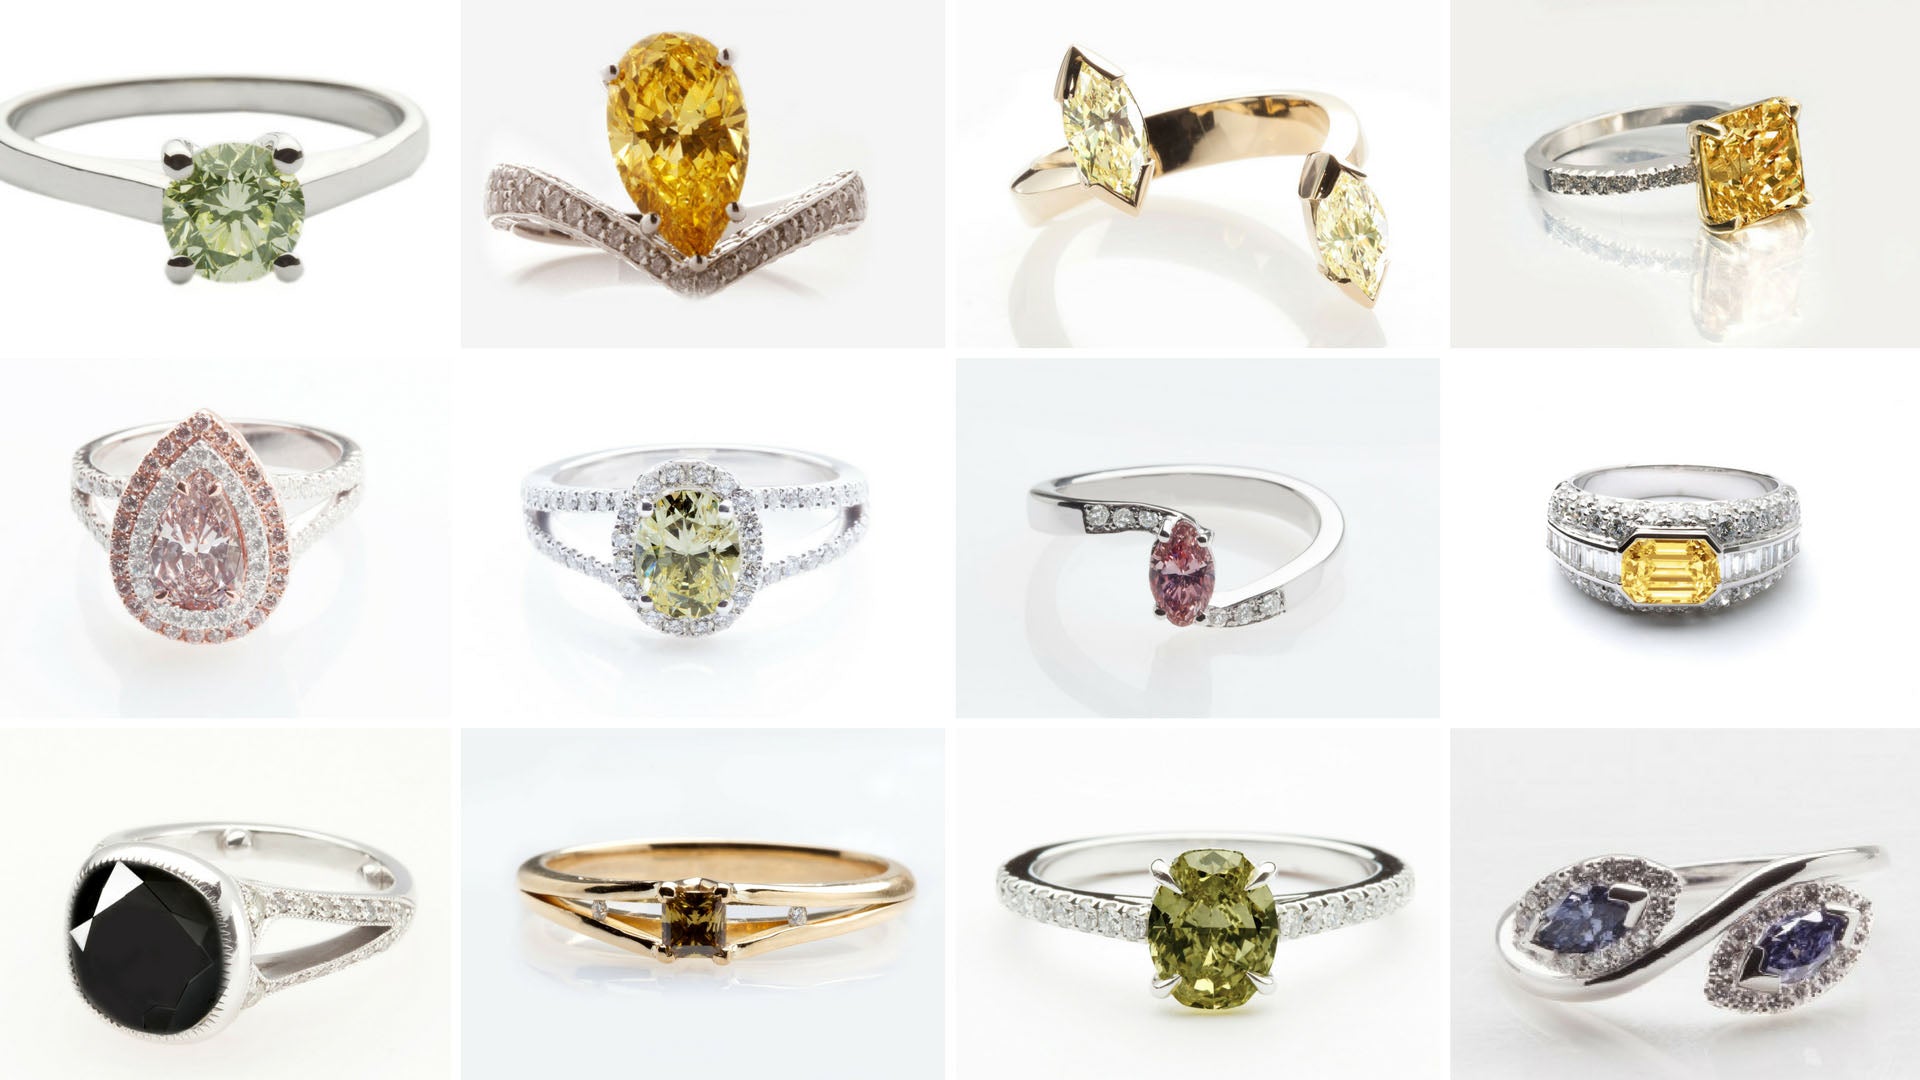 Get Your One-of-Kind Engagement Ring